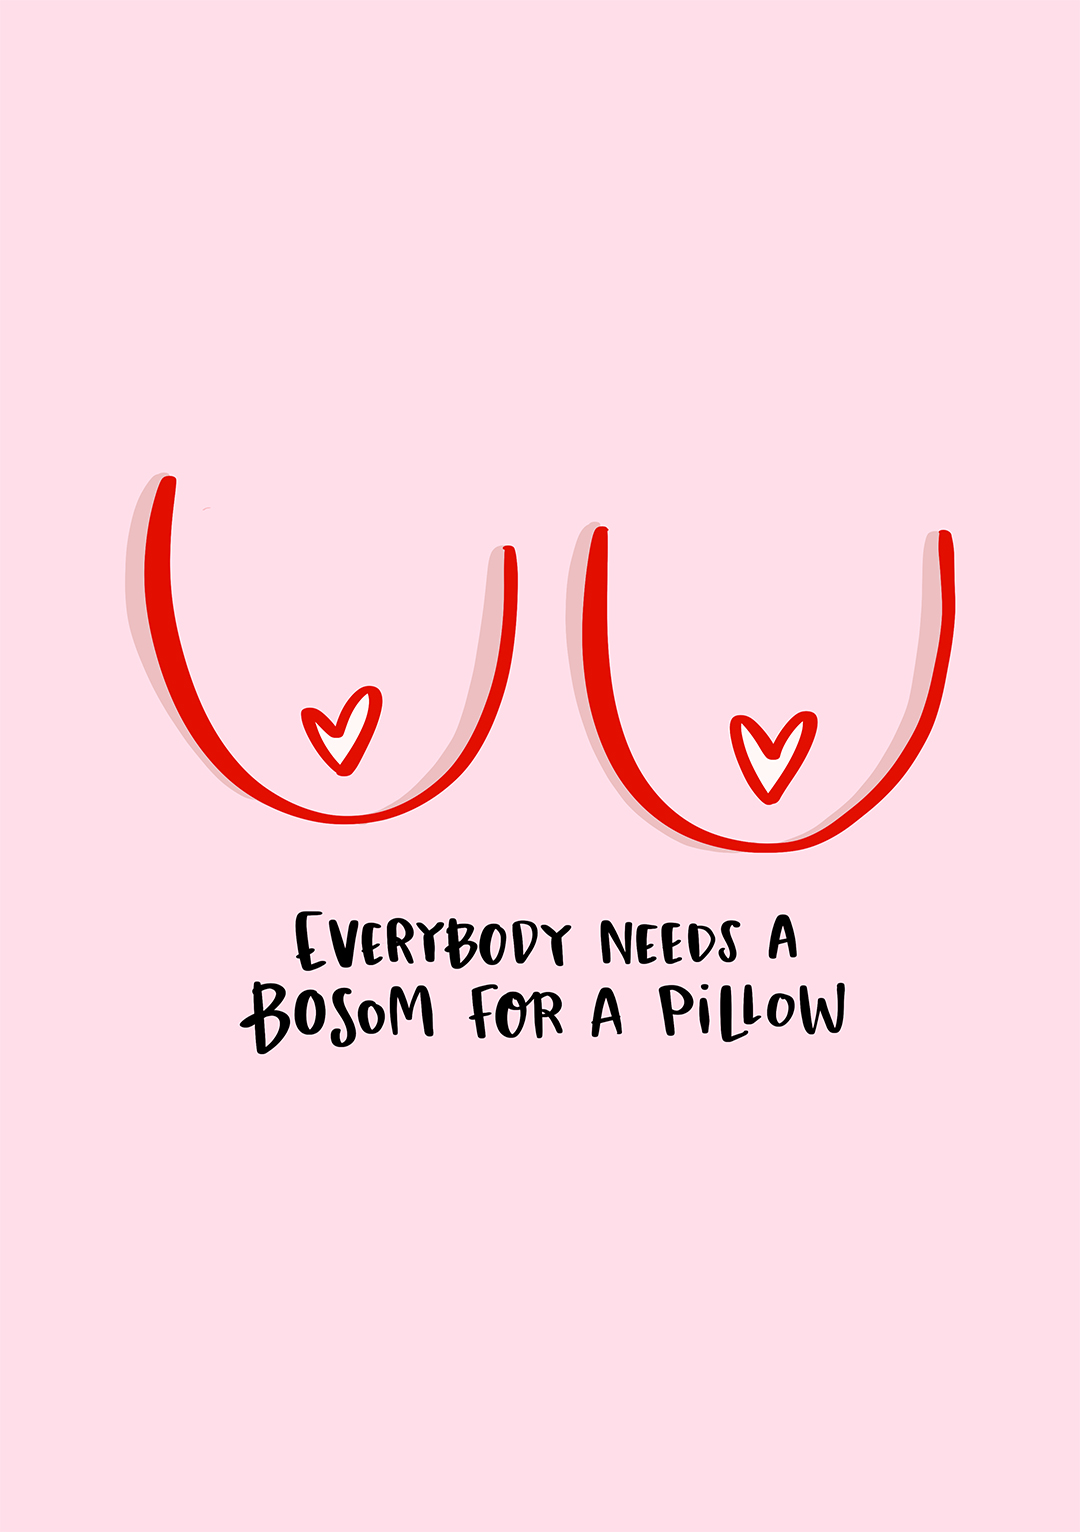 Everyone Needs A Pillow - Valentine's Day Card